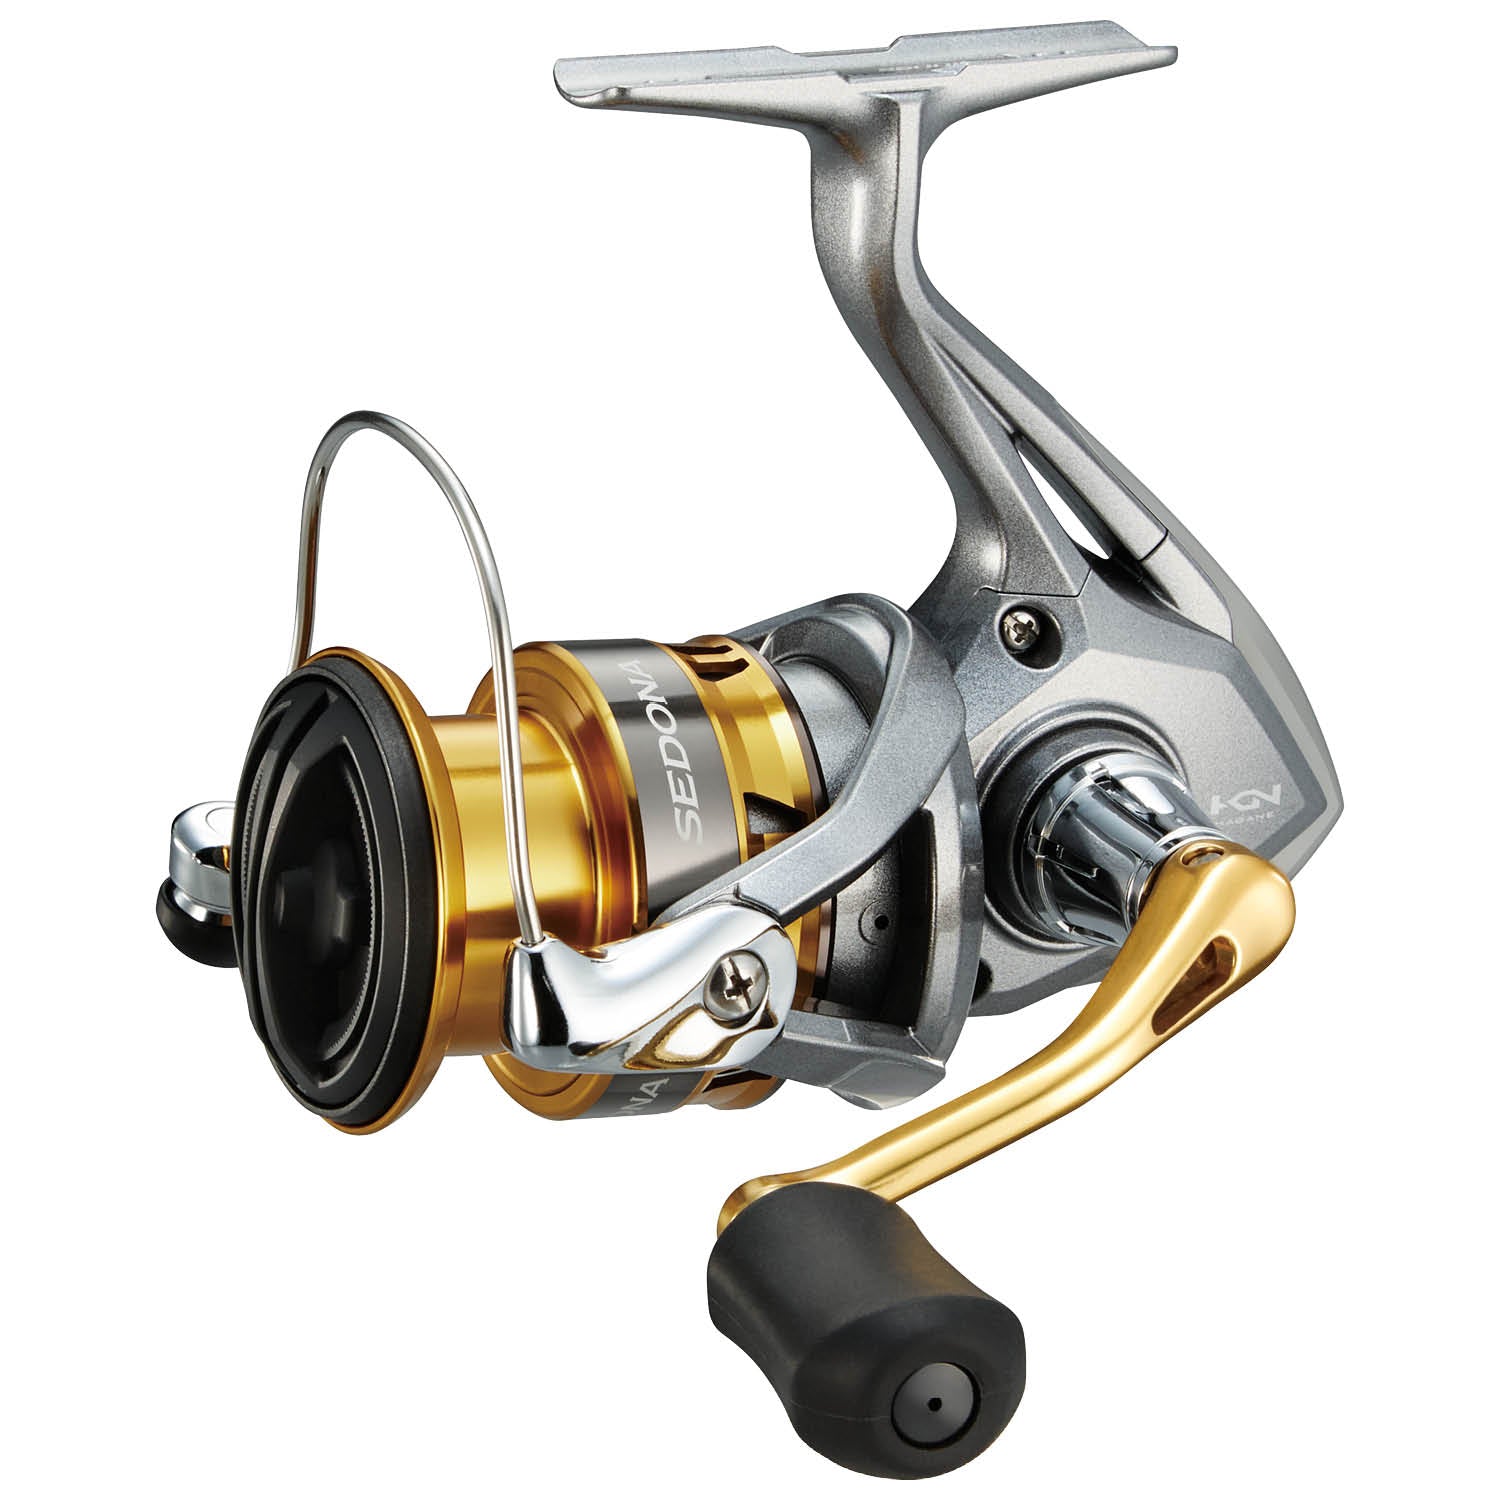 SHIMANO 16 Stradic CI4+ 2500S Spinning Fishing Reel Japan import Excellent +